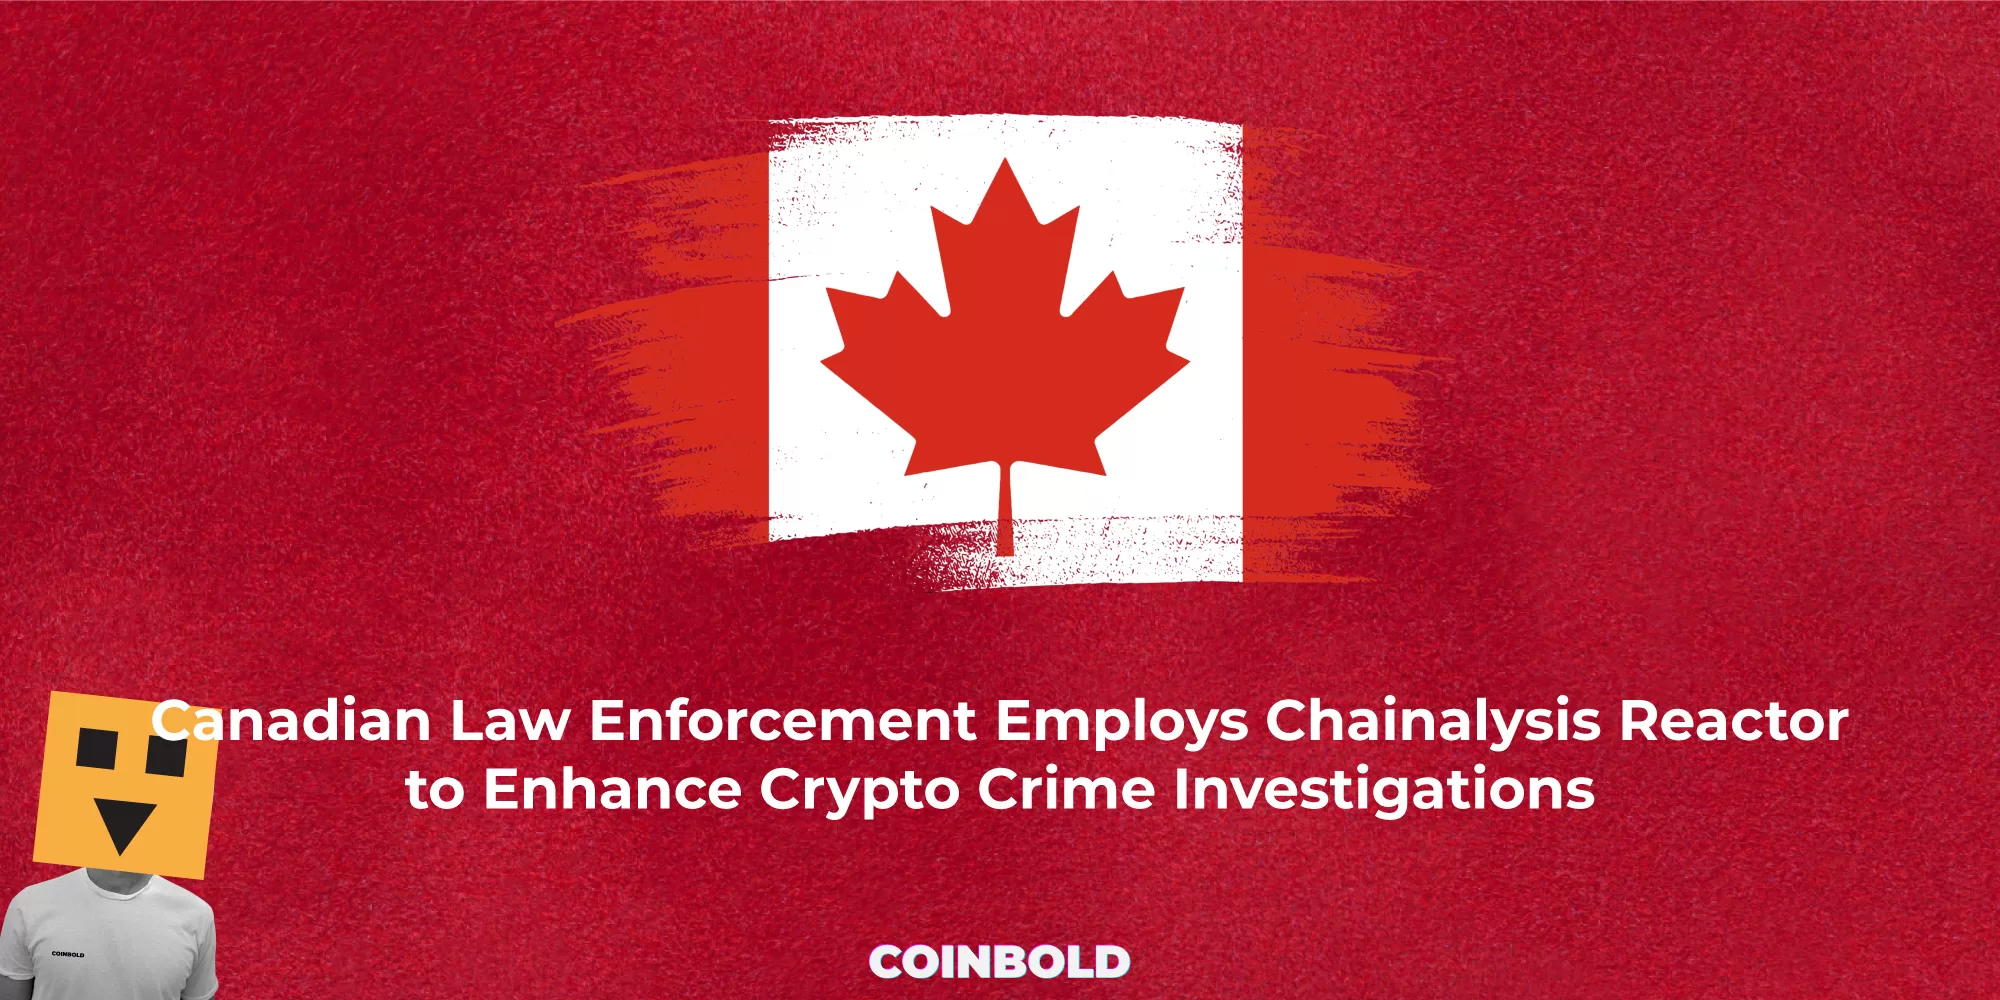 Canadian Law Enforcement Employs Chainalysis Reactor to Enhance Crypto Crime Investigations